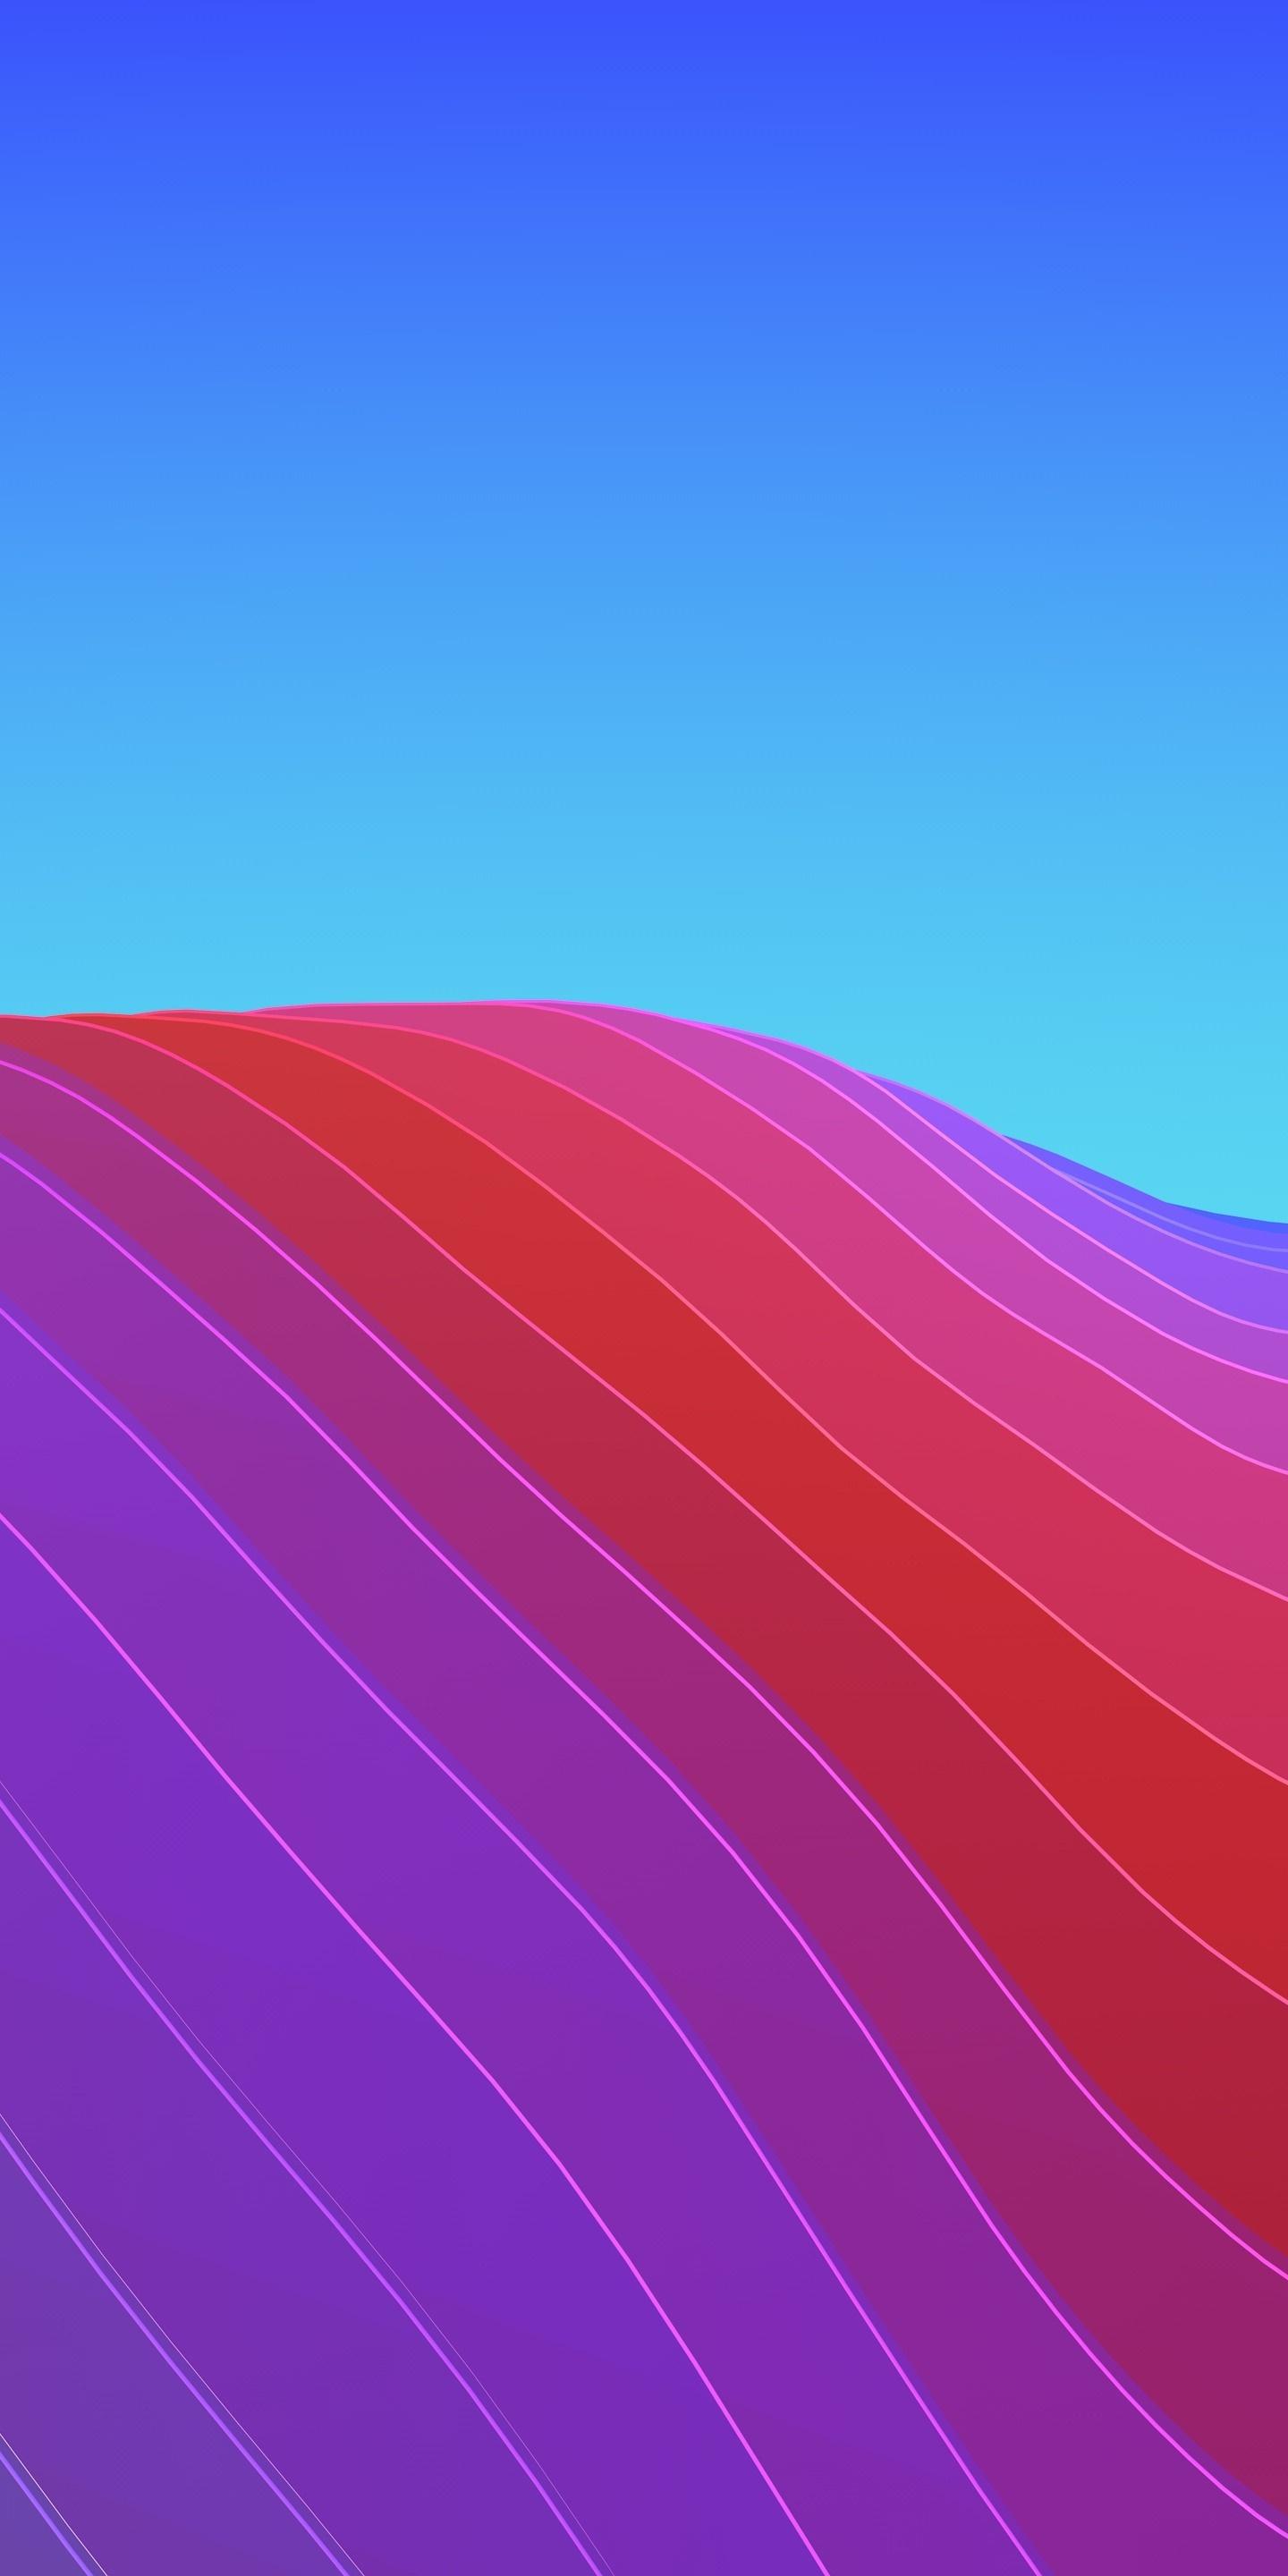 Download 1440x2880 wallpaper waves, abstract, gradient, ios